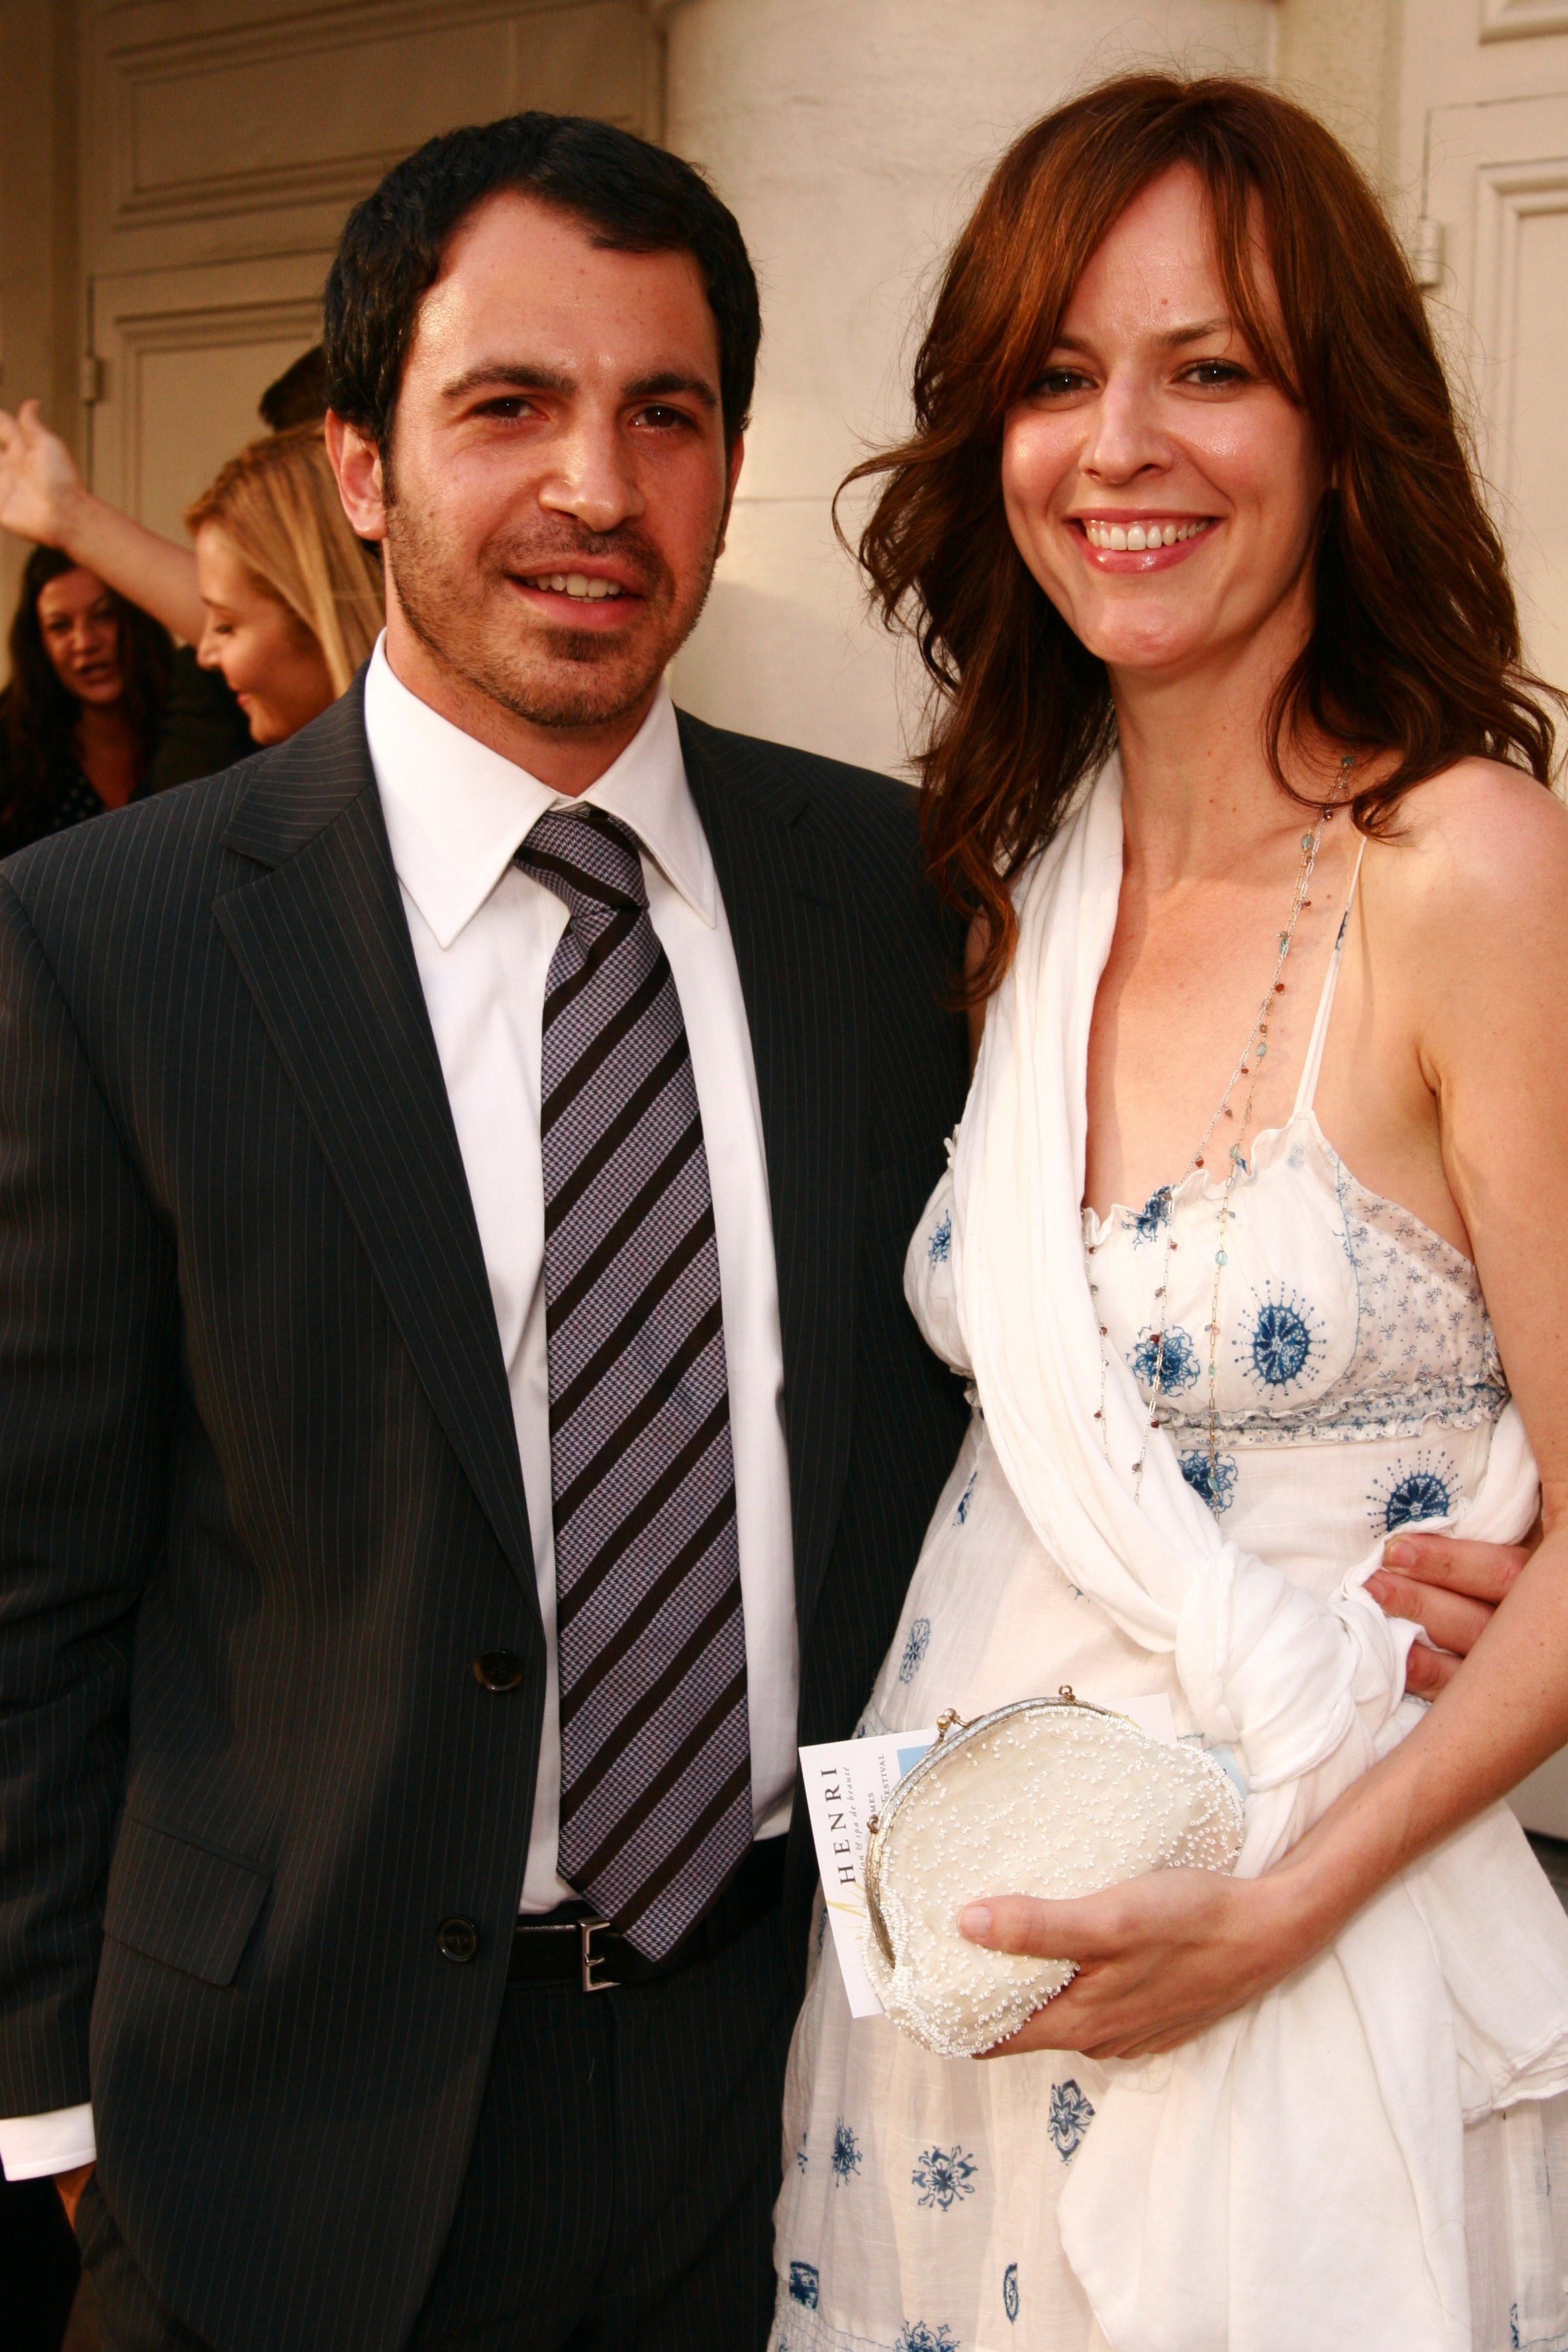 Chris Messina and Rosemary DeWitt during 2006 Los Angeles Film Festival "Ira and Abby" premiere in Los Angeles, California, United States. | Source: Getty Images